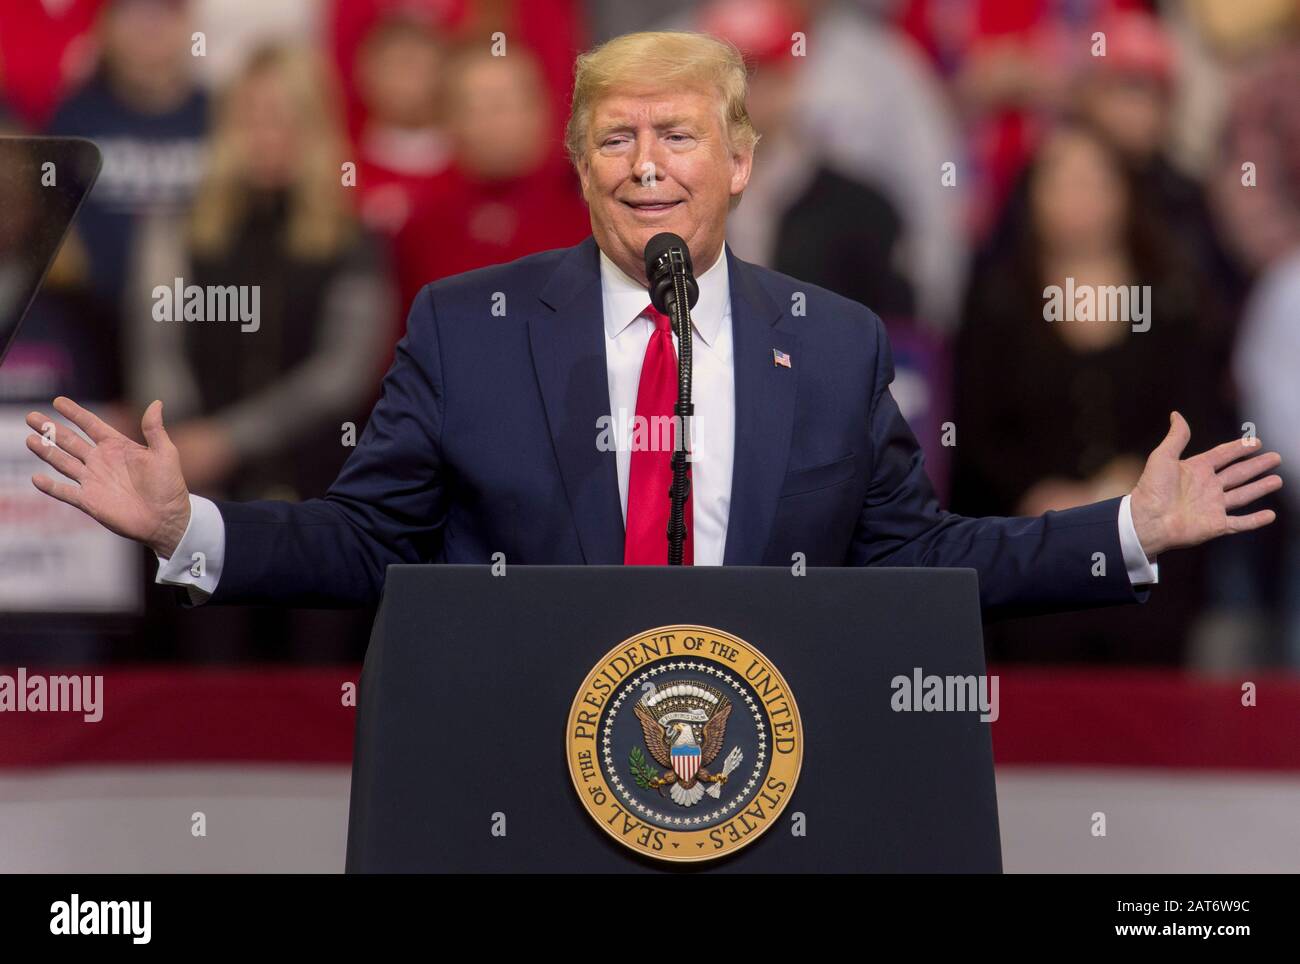 Des Moines, Iowa, USA. 30th Jan, 2020. President DONALD JOHN TRUMP holds a Keep America Great Rally at Drake University. The United State Senate is currently conducting an impeachment trial in Washington, DC which will determine whether Trump should be removed from office for abuse of power and obstruction of Congress. Credit: Brian Cahn/ZUMA Wire/Alamy Live News Stock Photo